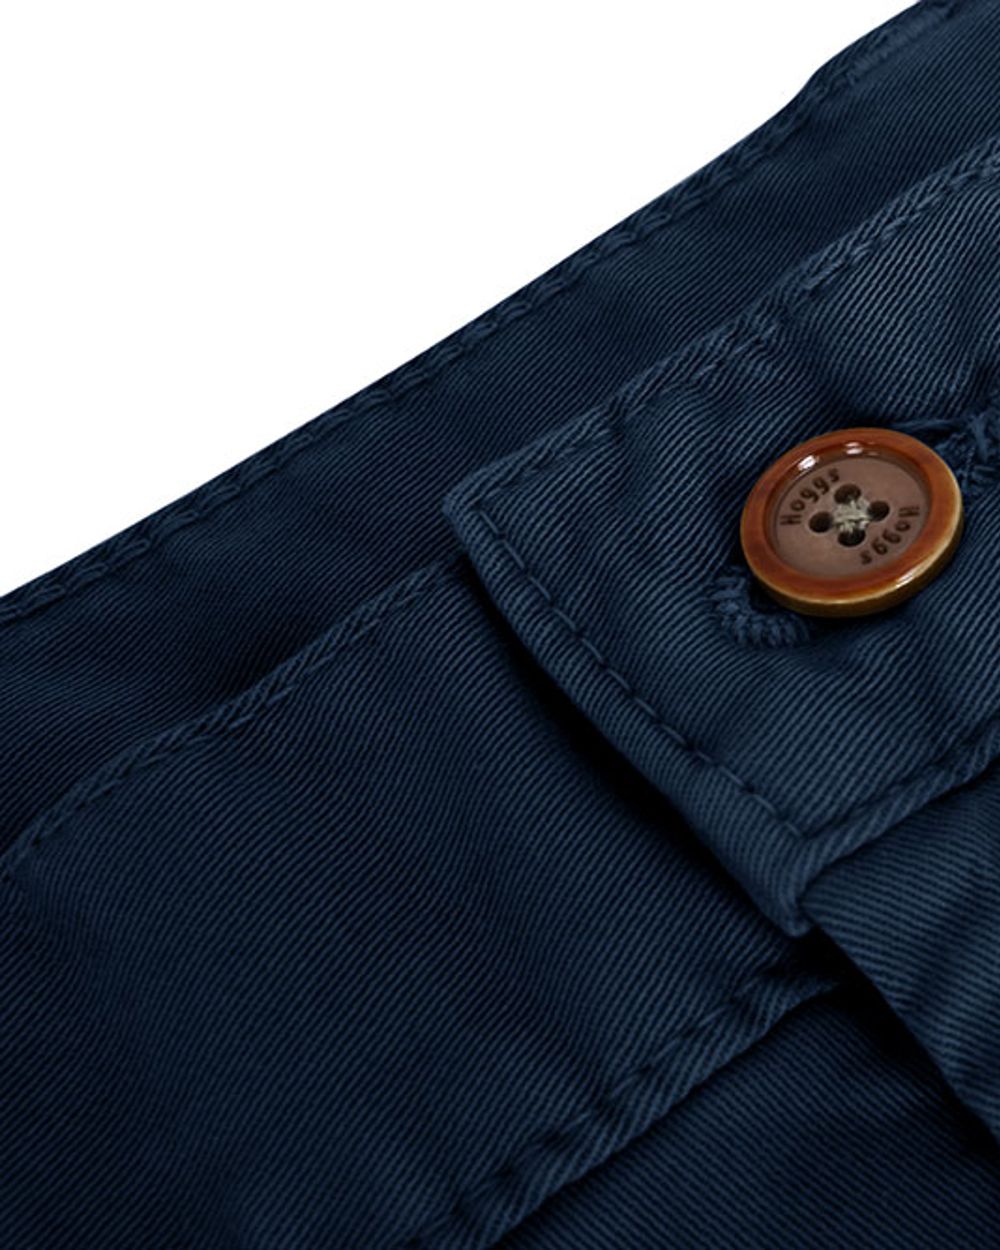 Hoggs of Fife Beauly Chino Trousers in navy 